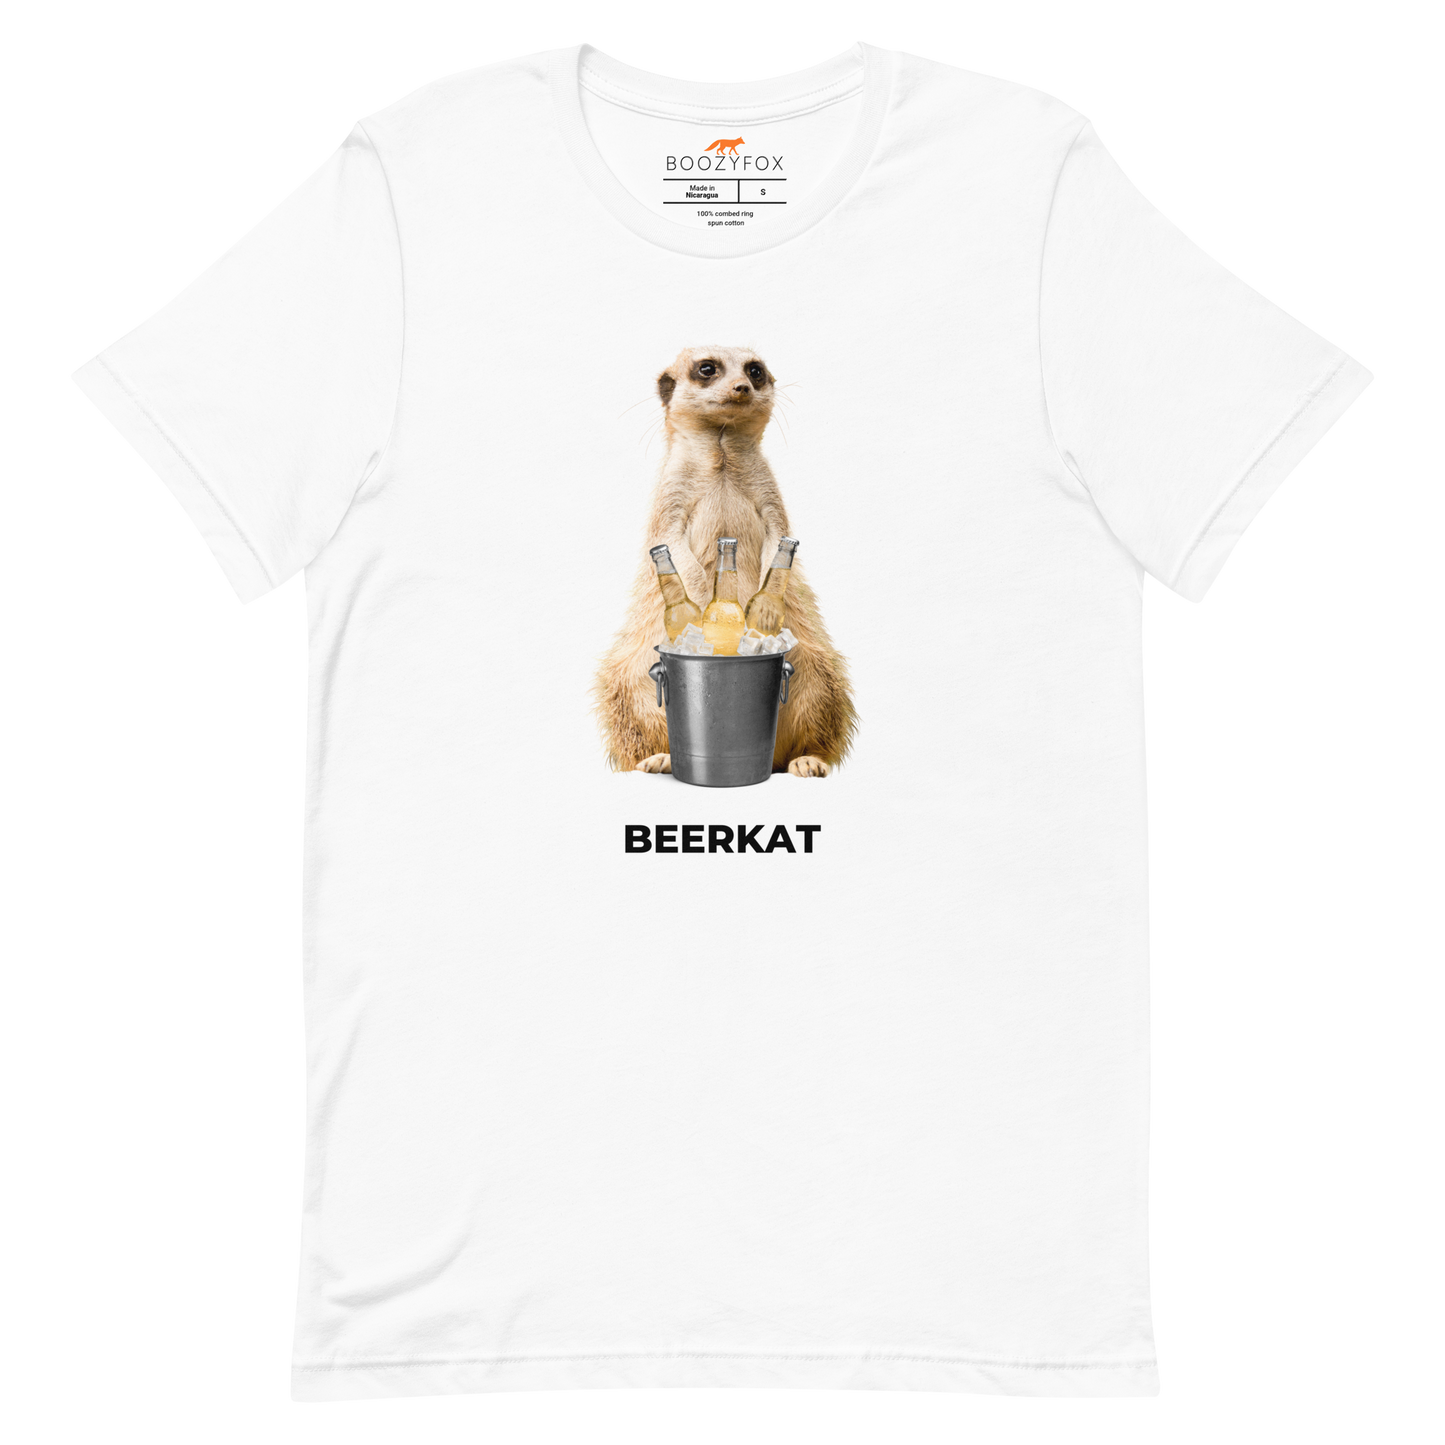 White Premium Meerkat T-Shirt featuring a hilarious Beerkat graphic on the chest - Funny Graphic Meerkat Tees - Boozy Fox